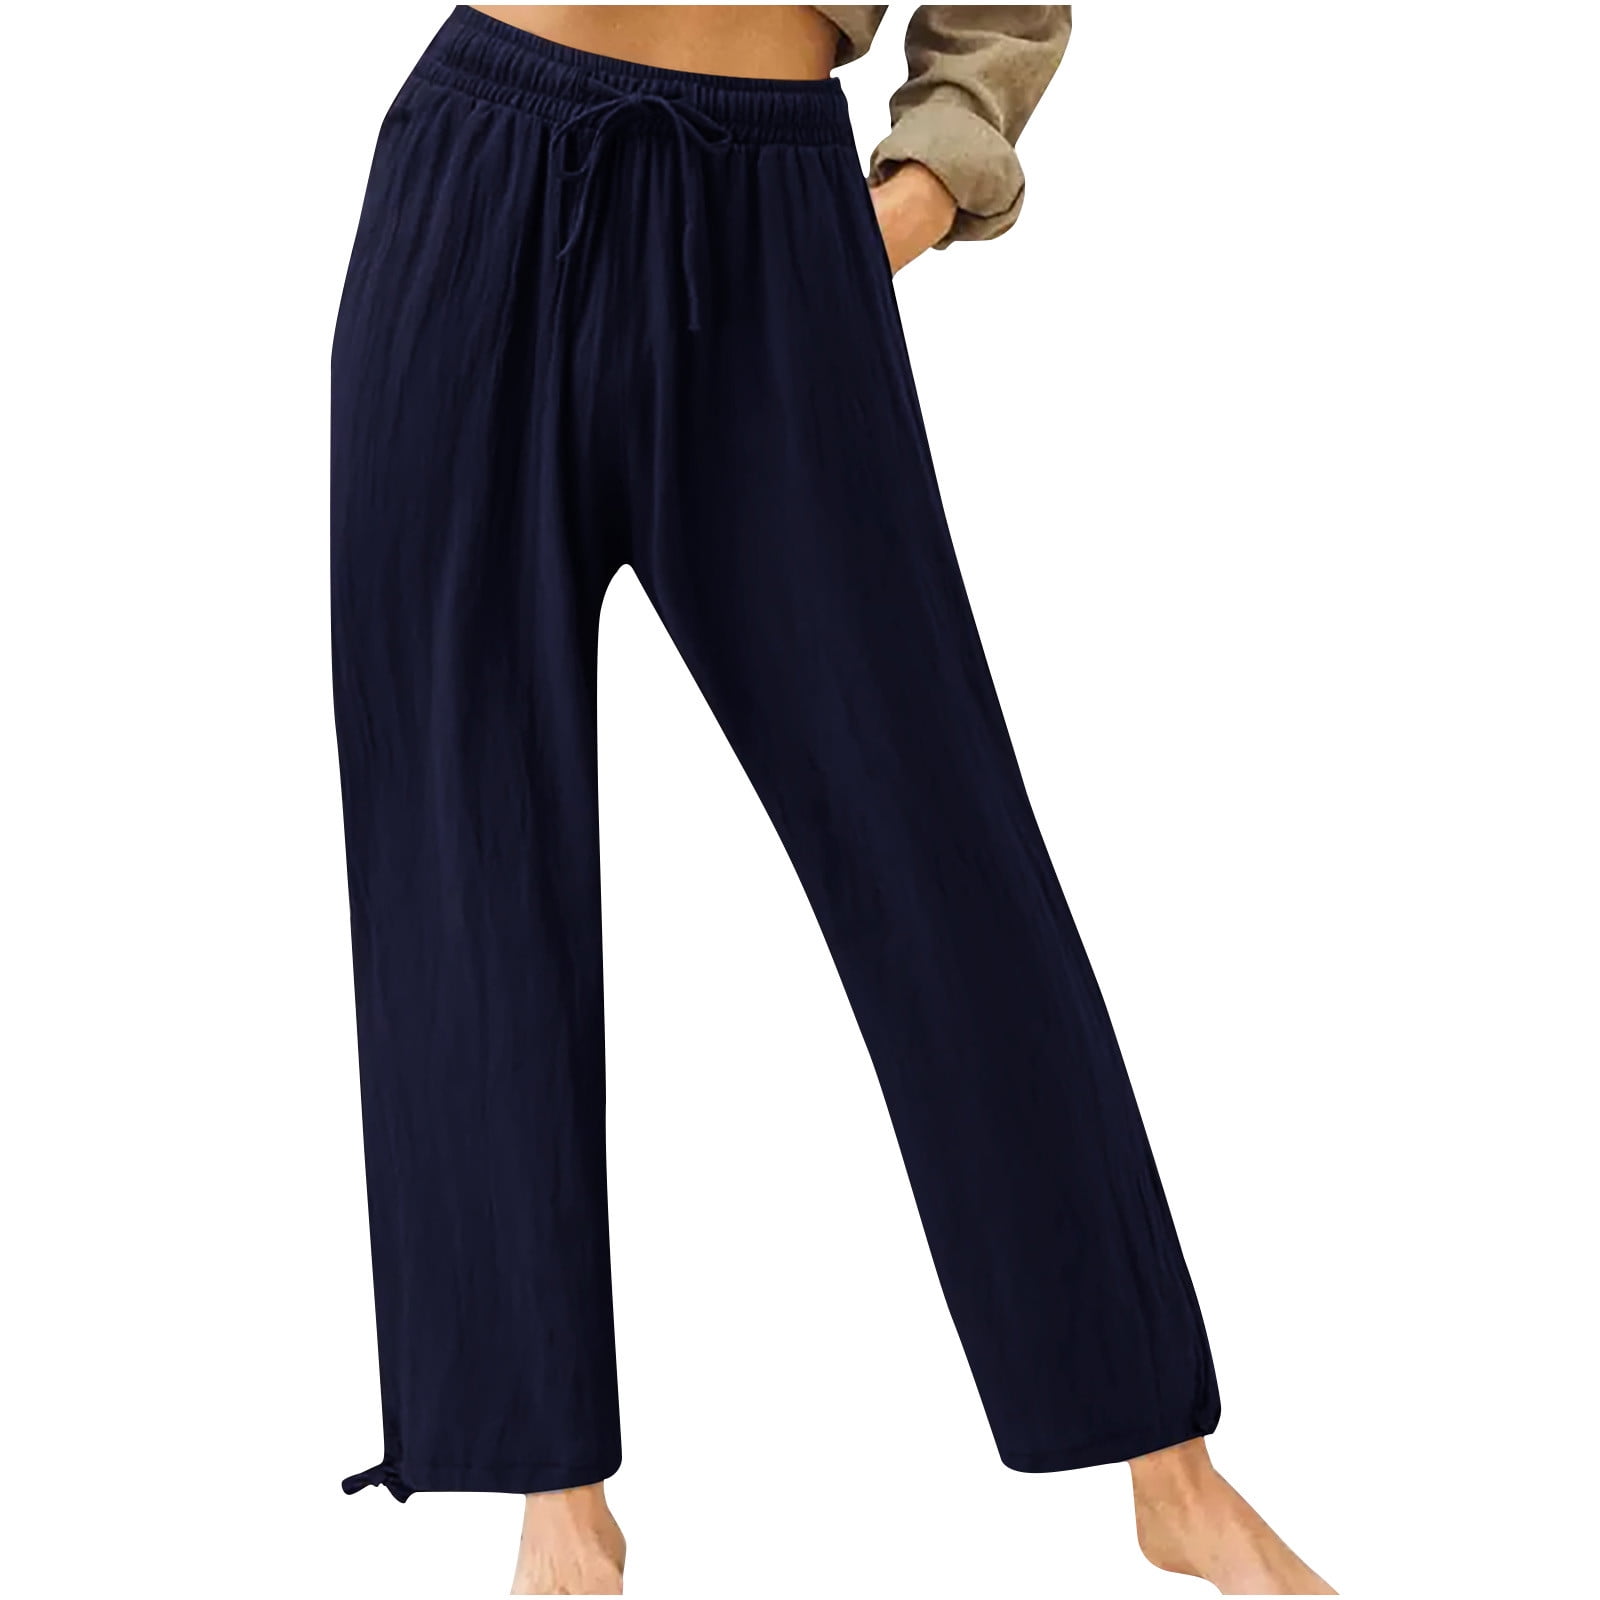 Plus Size Wide Leg Pants for Women Summer Casual Loose Fitting Lounge Pant  Slacks Trousers Drawstring Solid Color (Small, Dark Blue) 